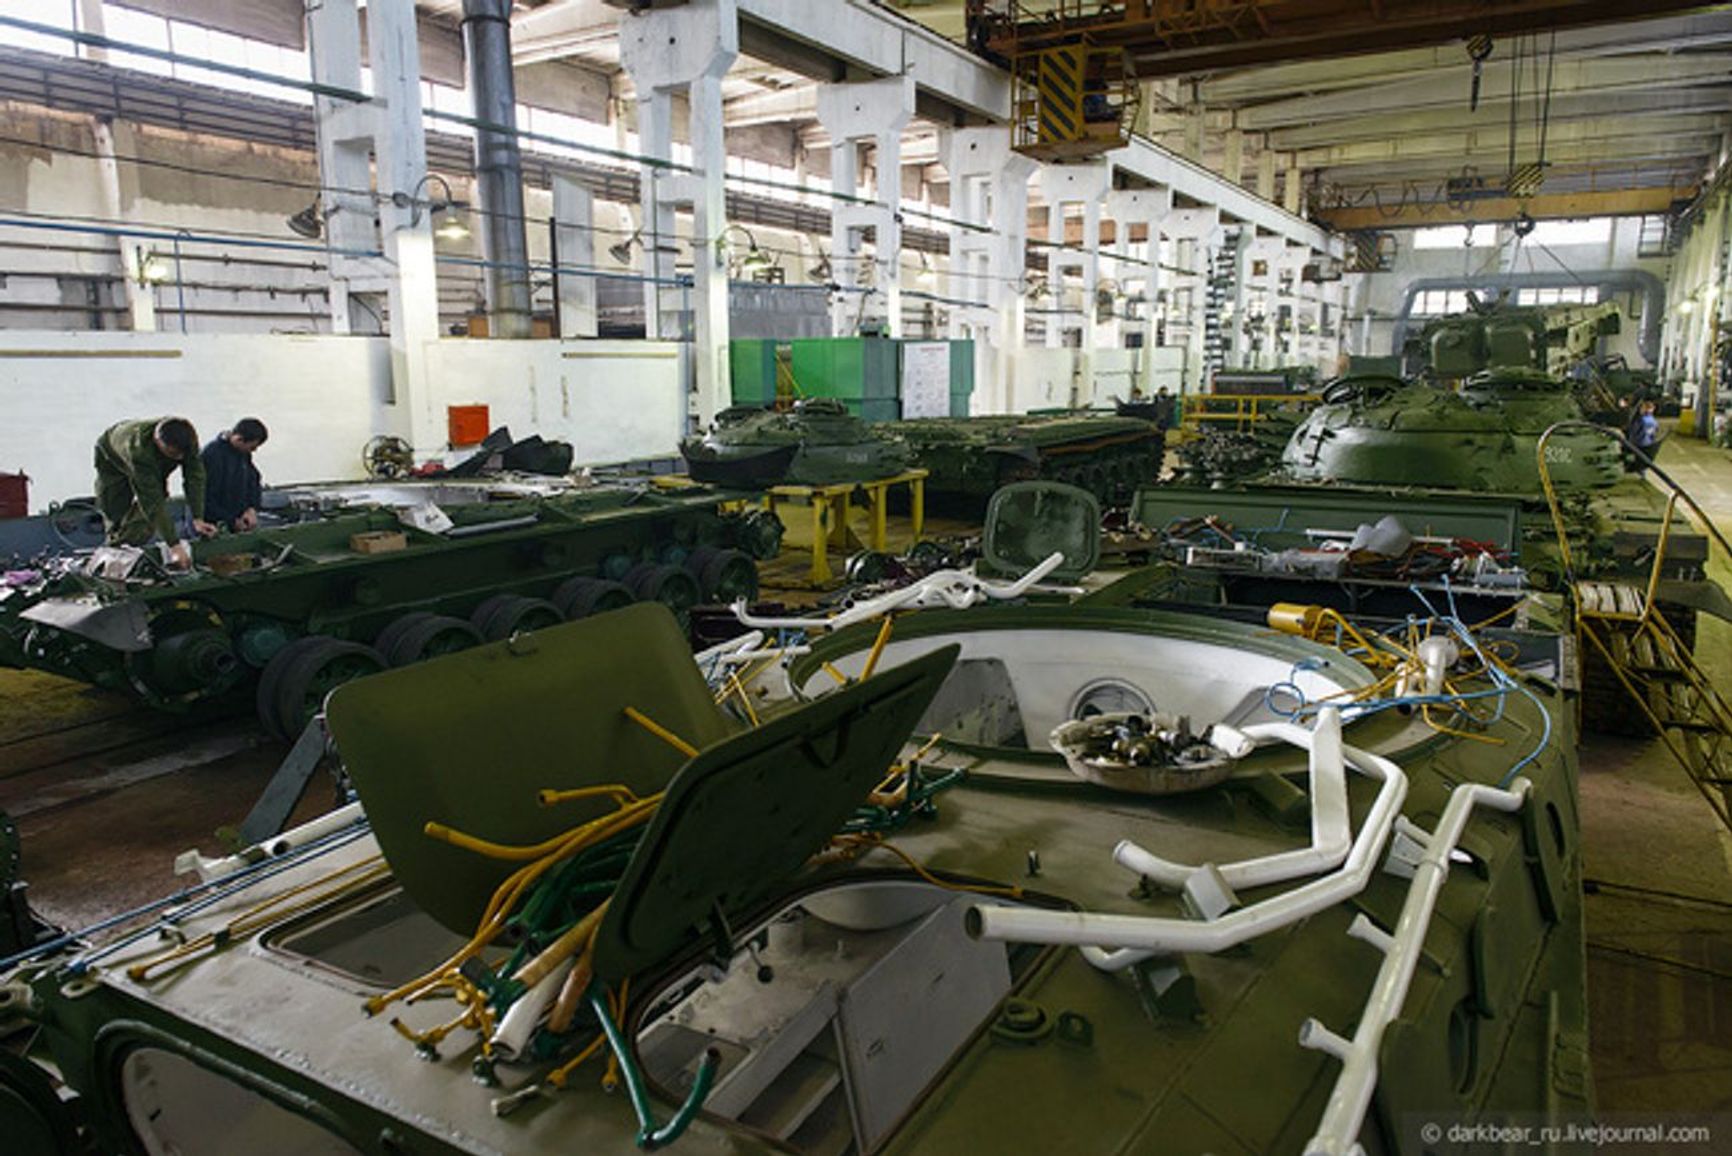 A workshop at the 103rd Armored Vehicle Repair Plant in Transbaikalia. Photo taken in 2012